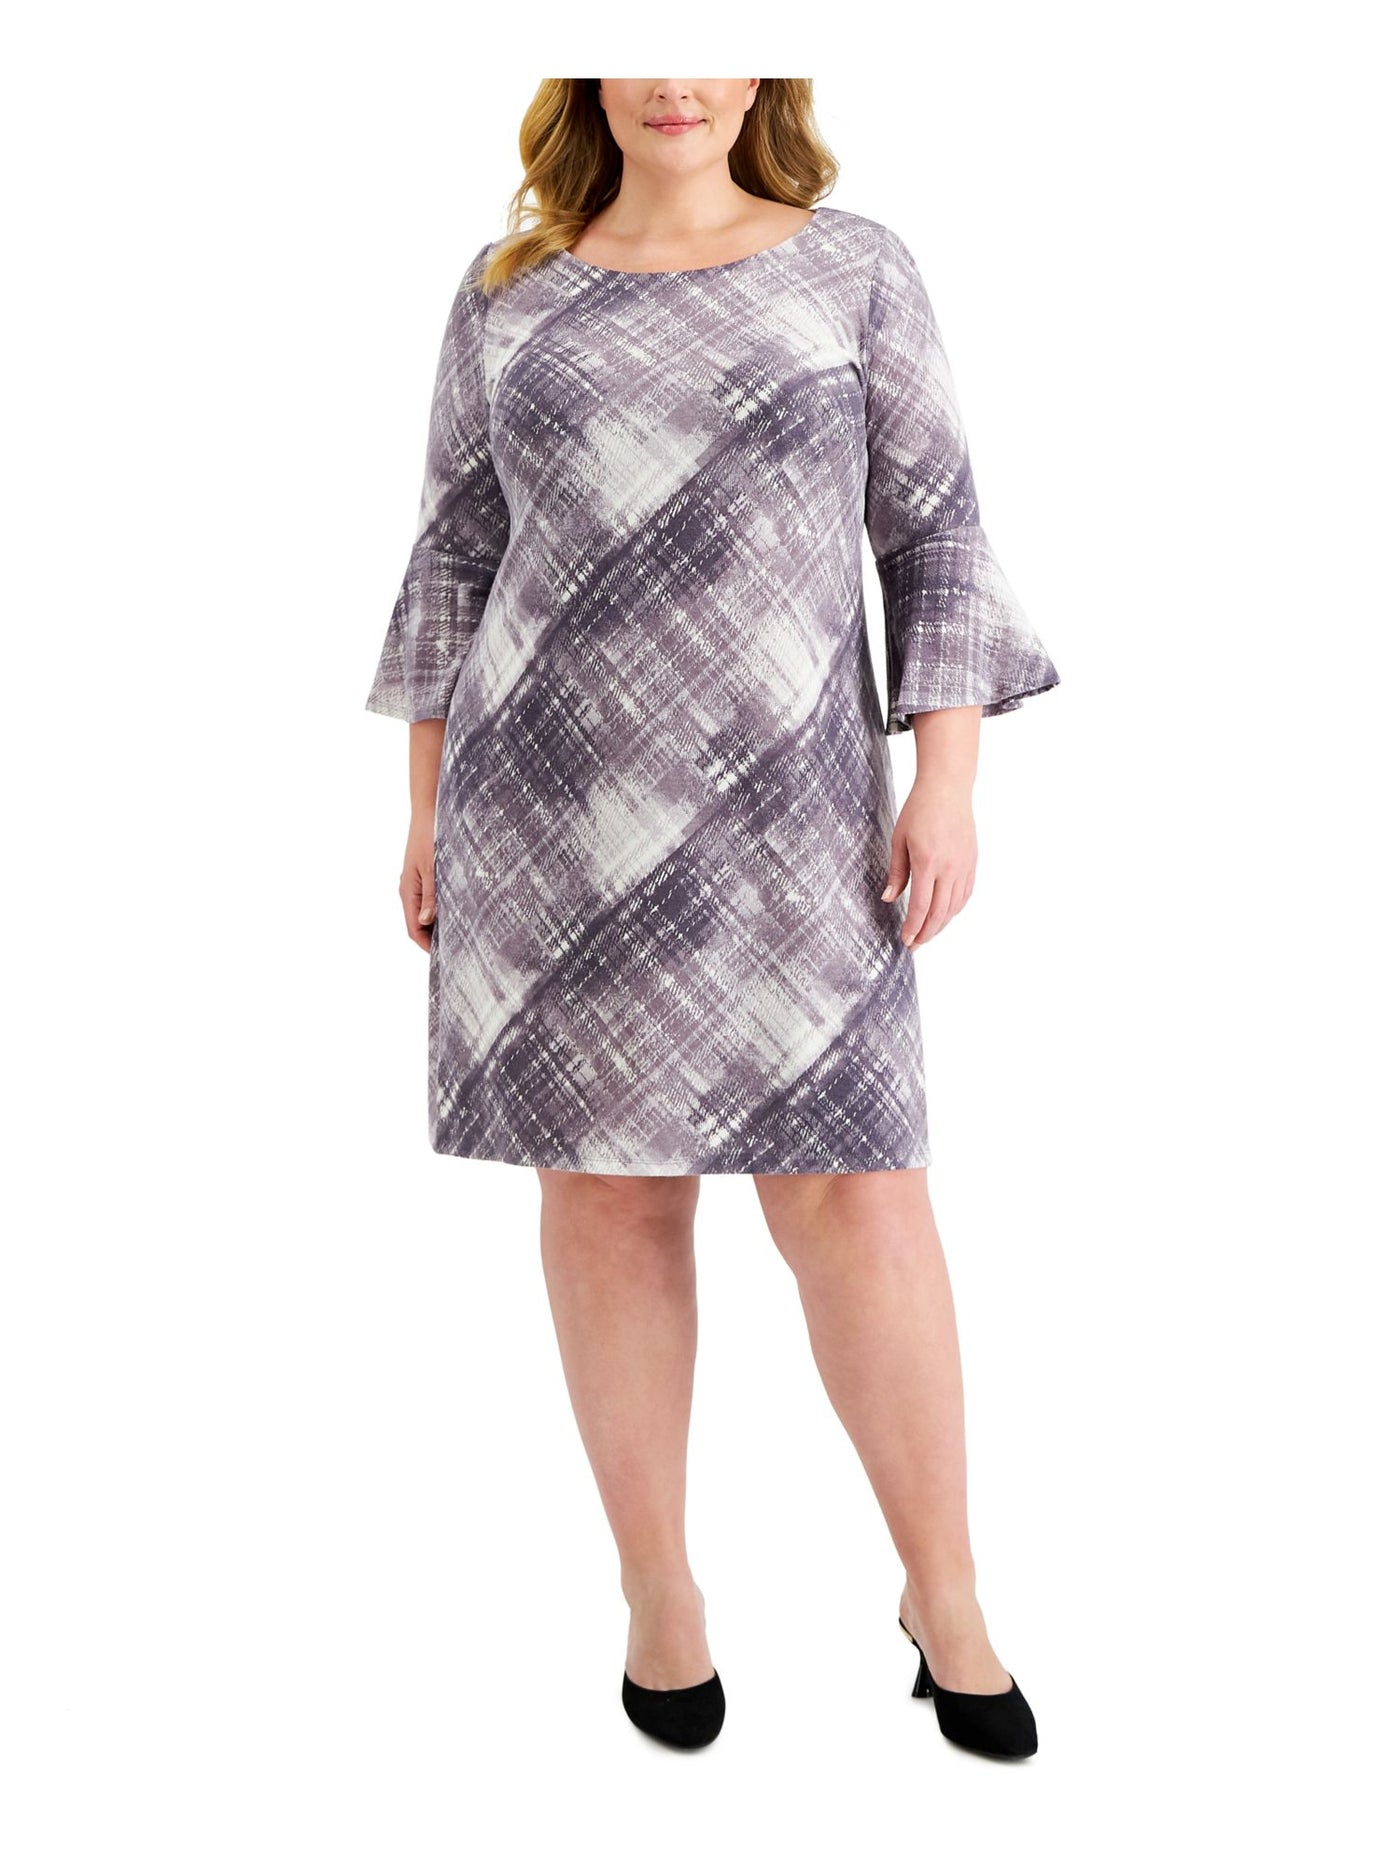 CONNECTED APPAREL Womens Purple Stretch Plaid Bell Sleeve Round Neck Above The Knee Wear To Work Fit + Flare Dress Plus 24W